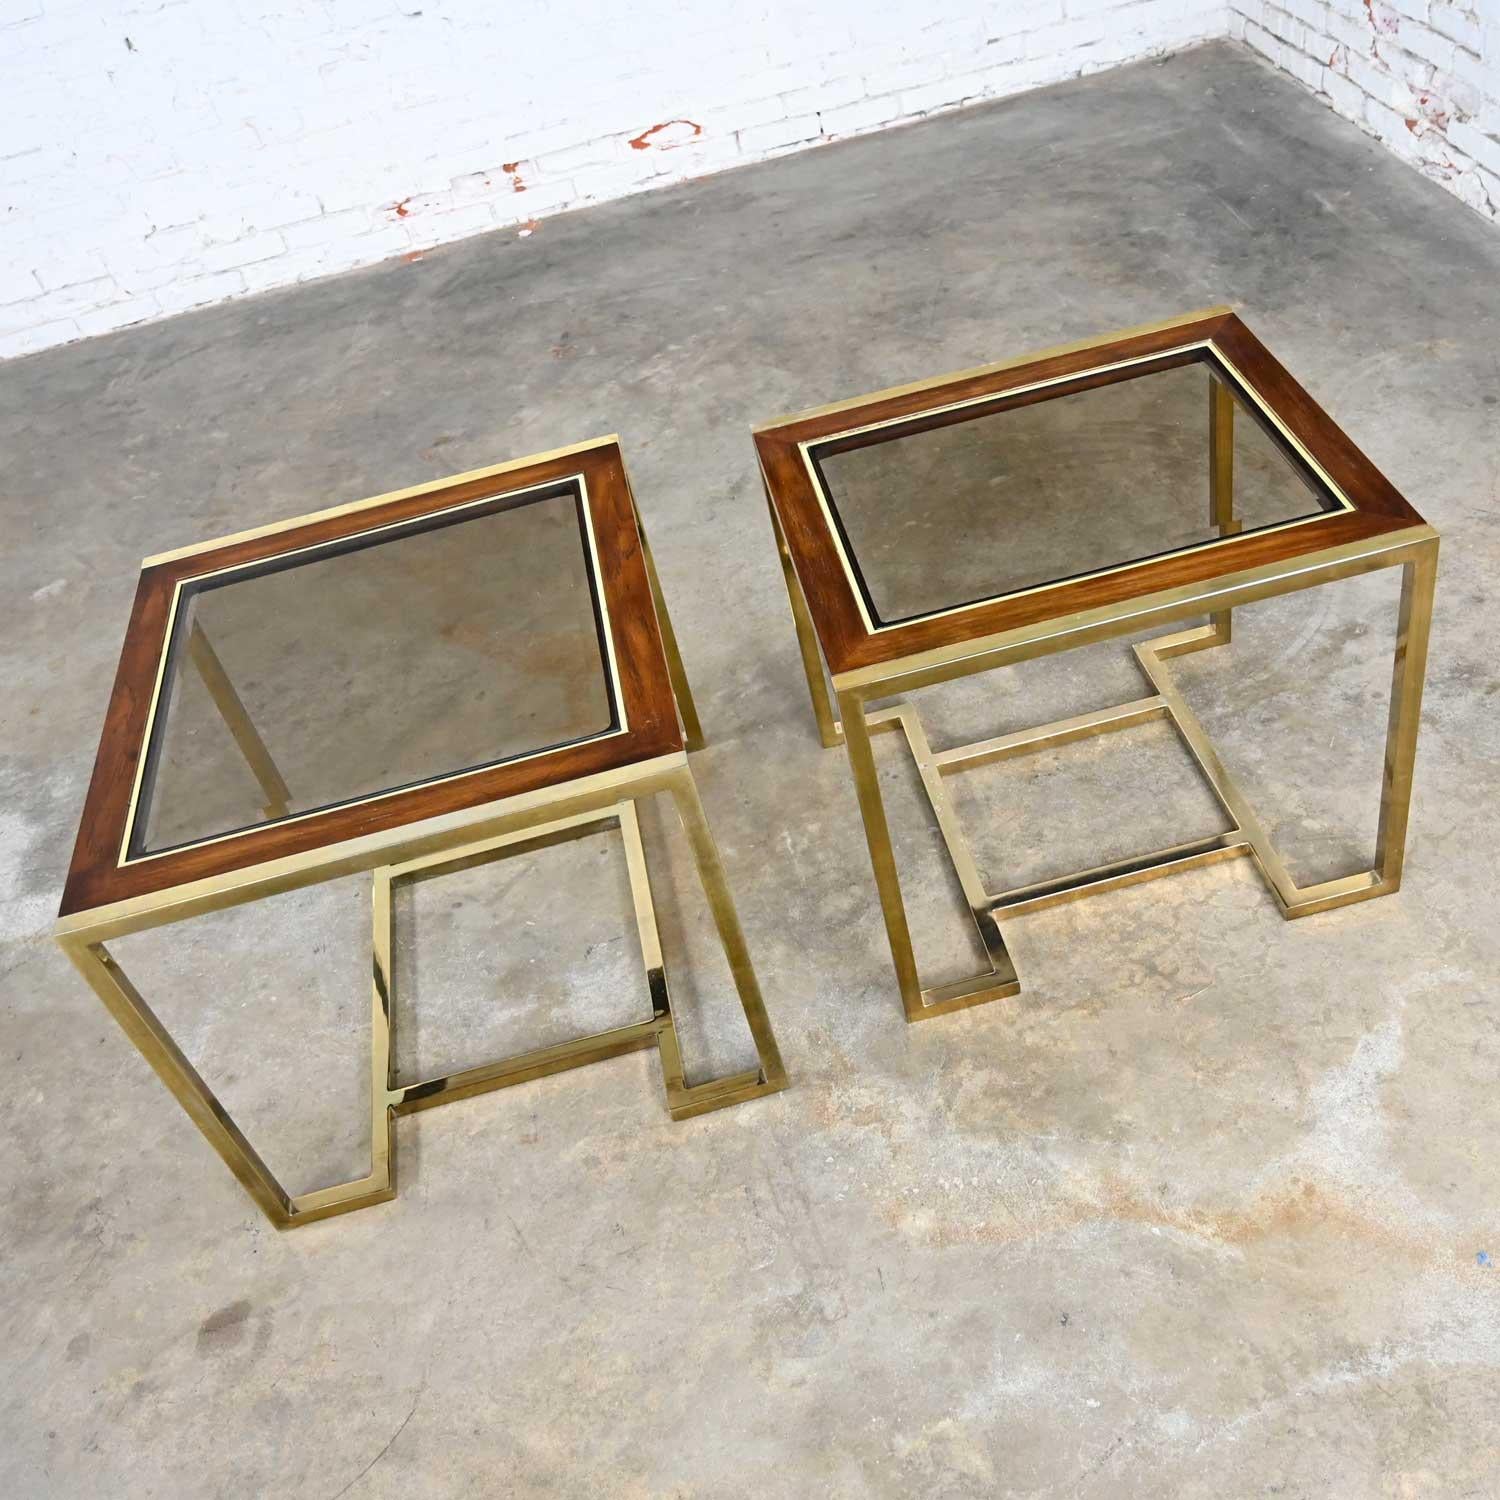 2 Brass Plated Wood & Glass End Tables by Thomasville Furn Style Milo Baughman For Sale 5